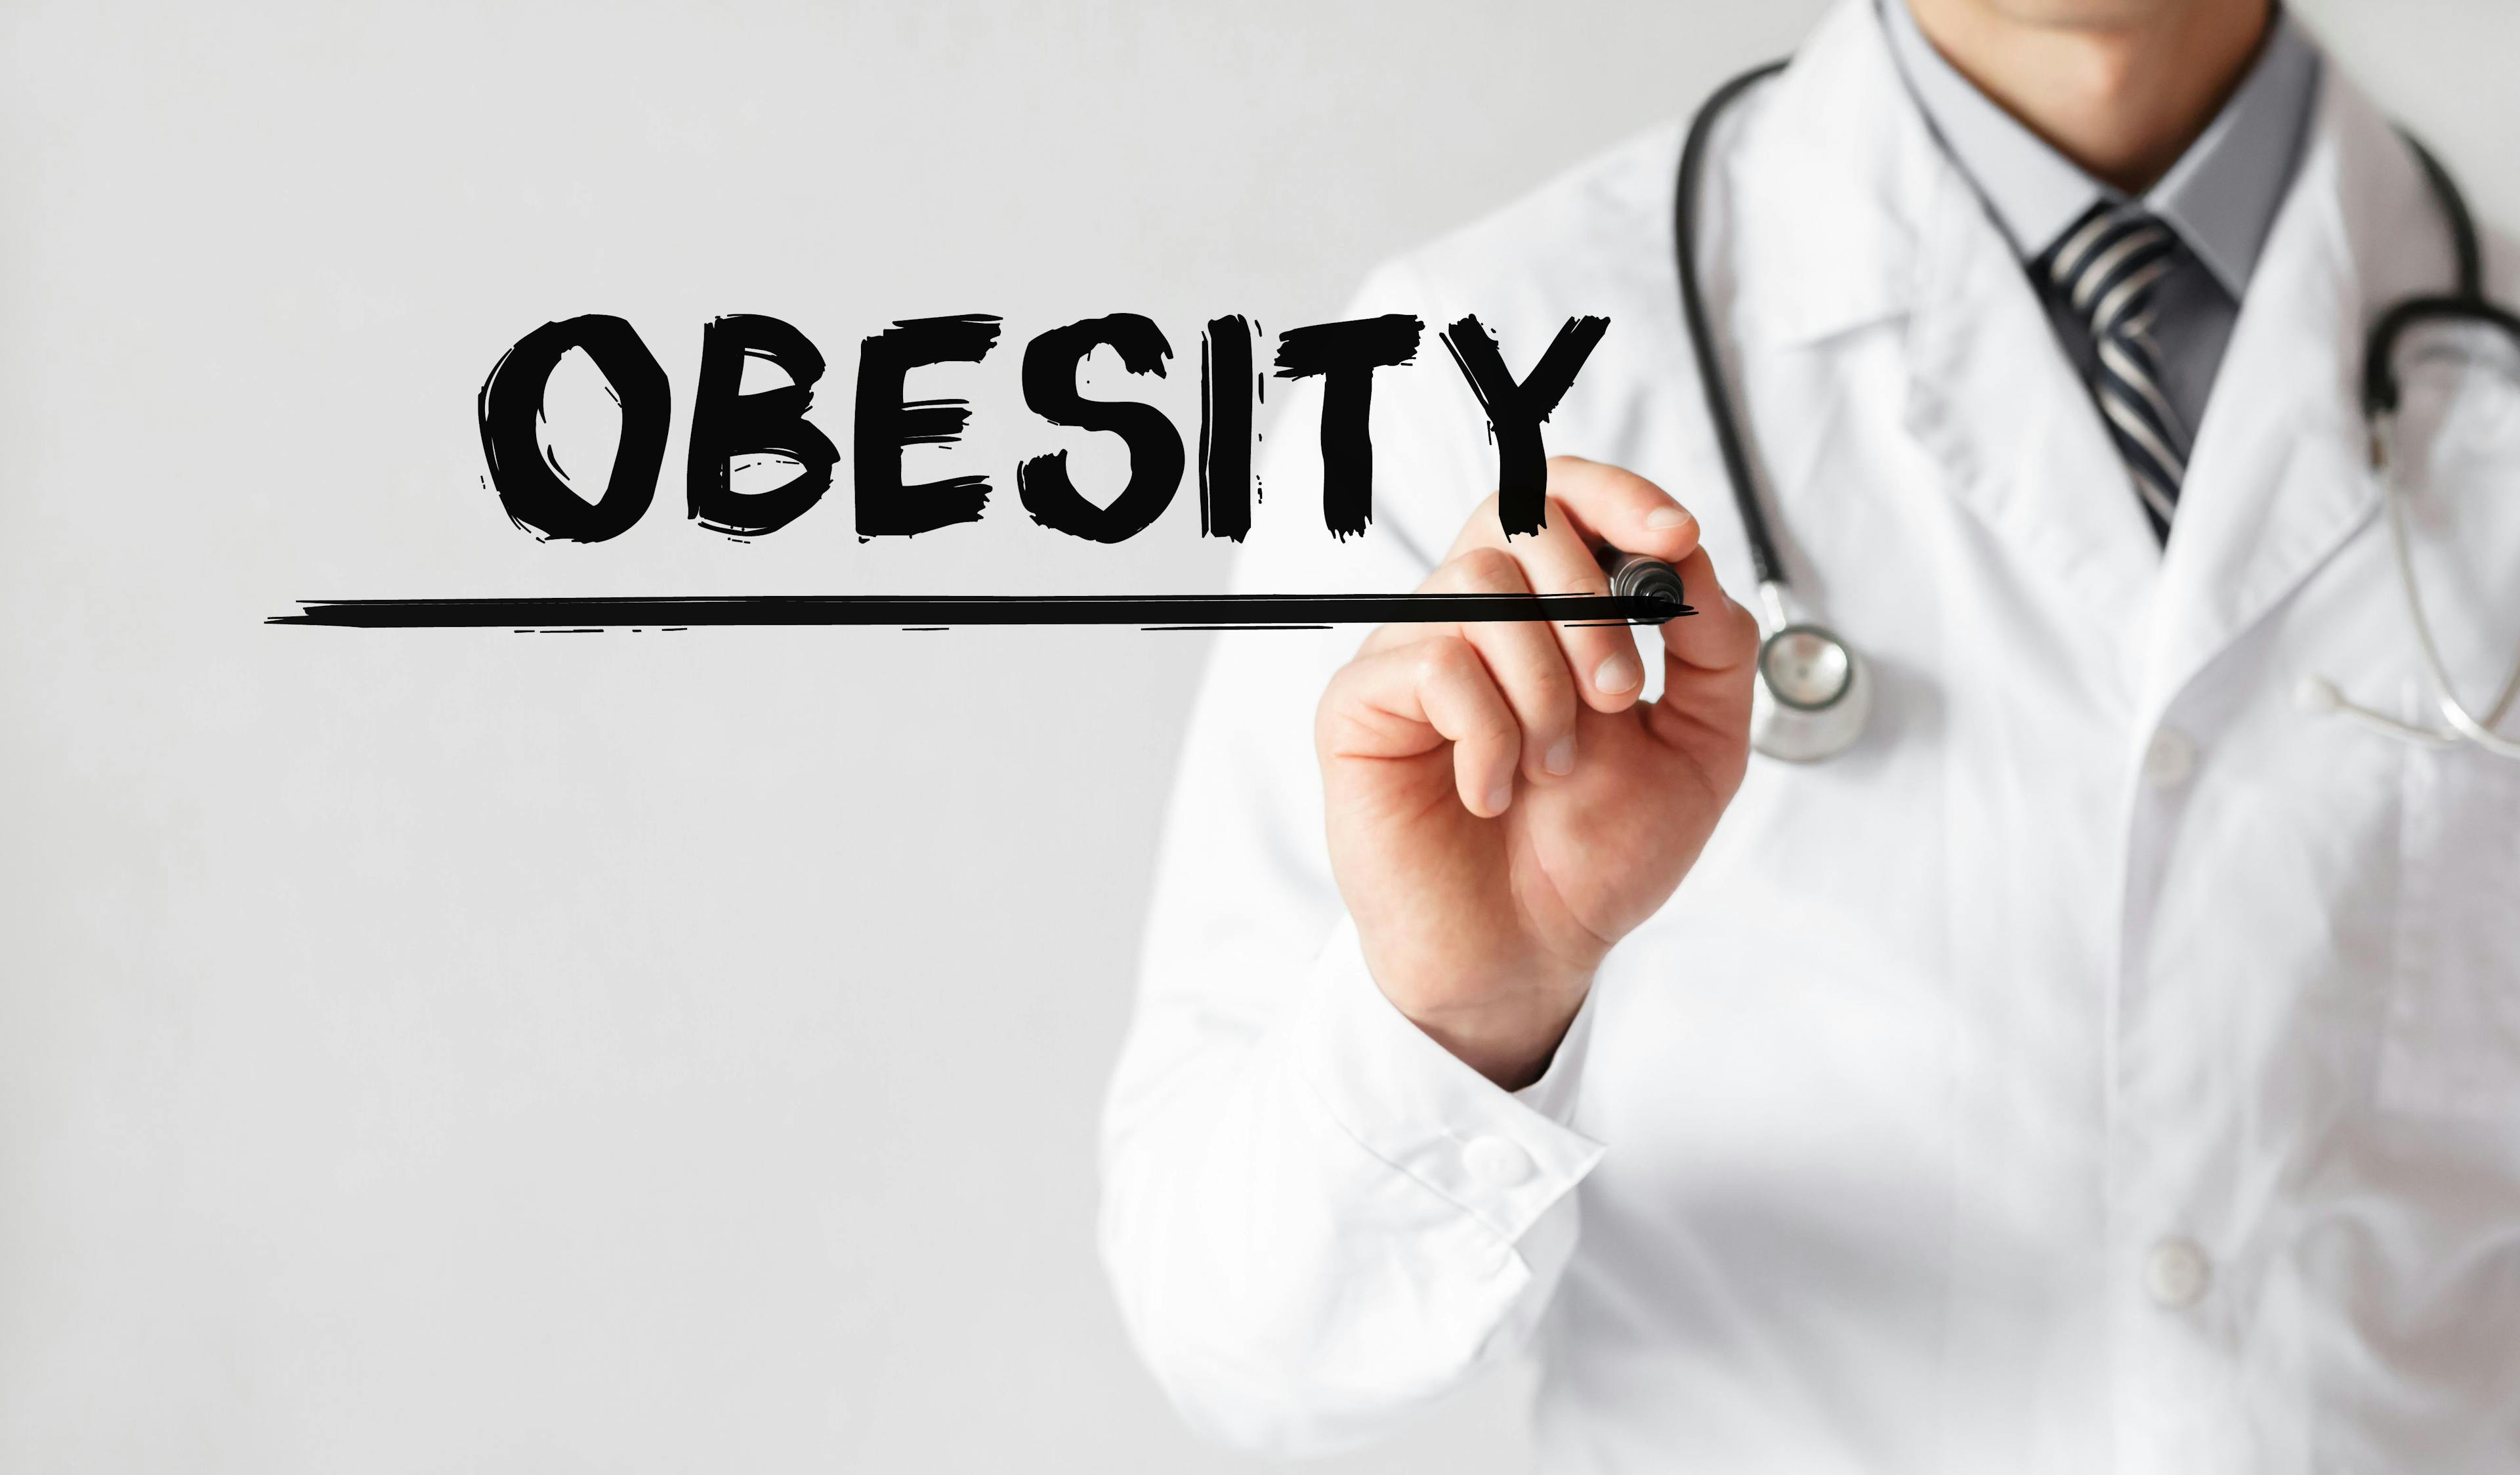 obesity, overweight concept